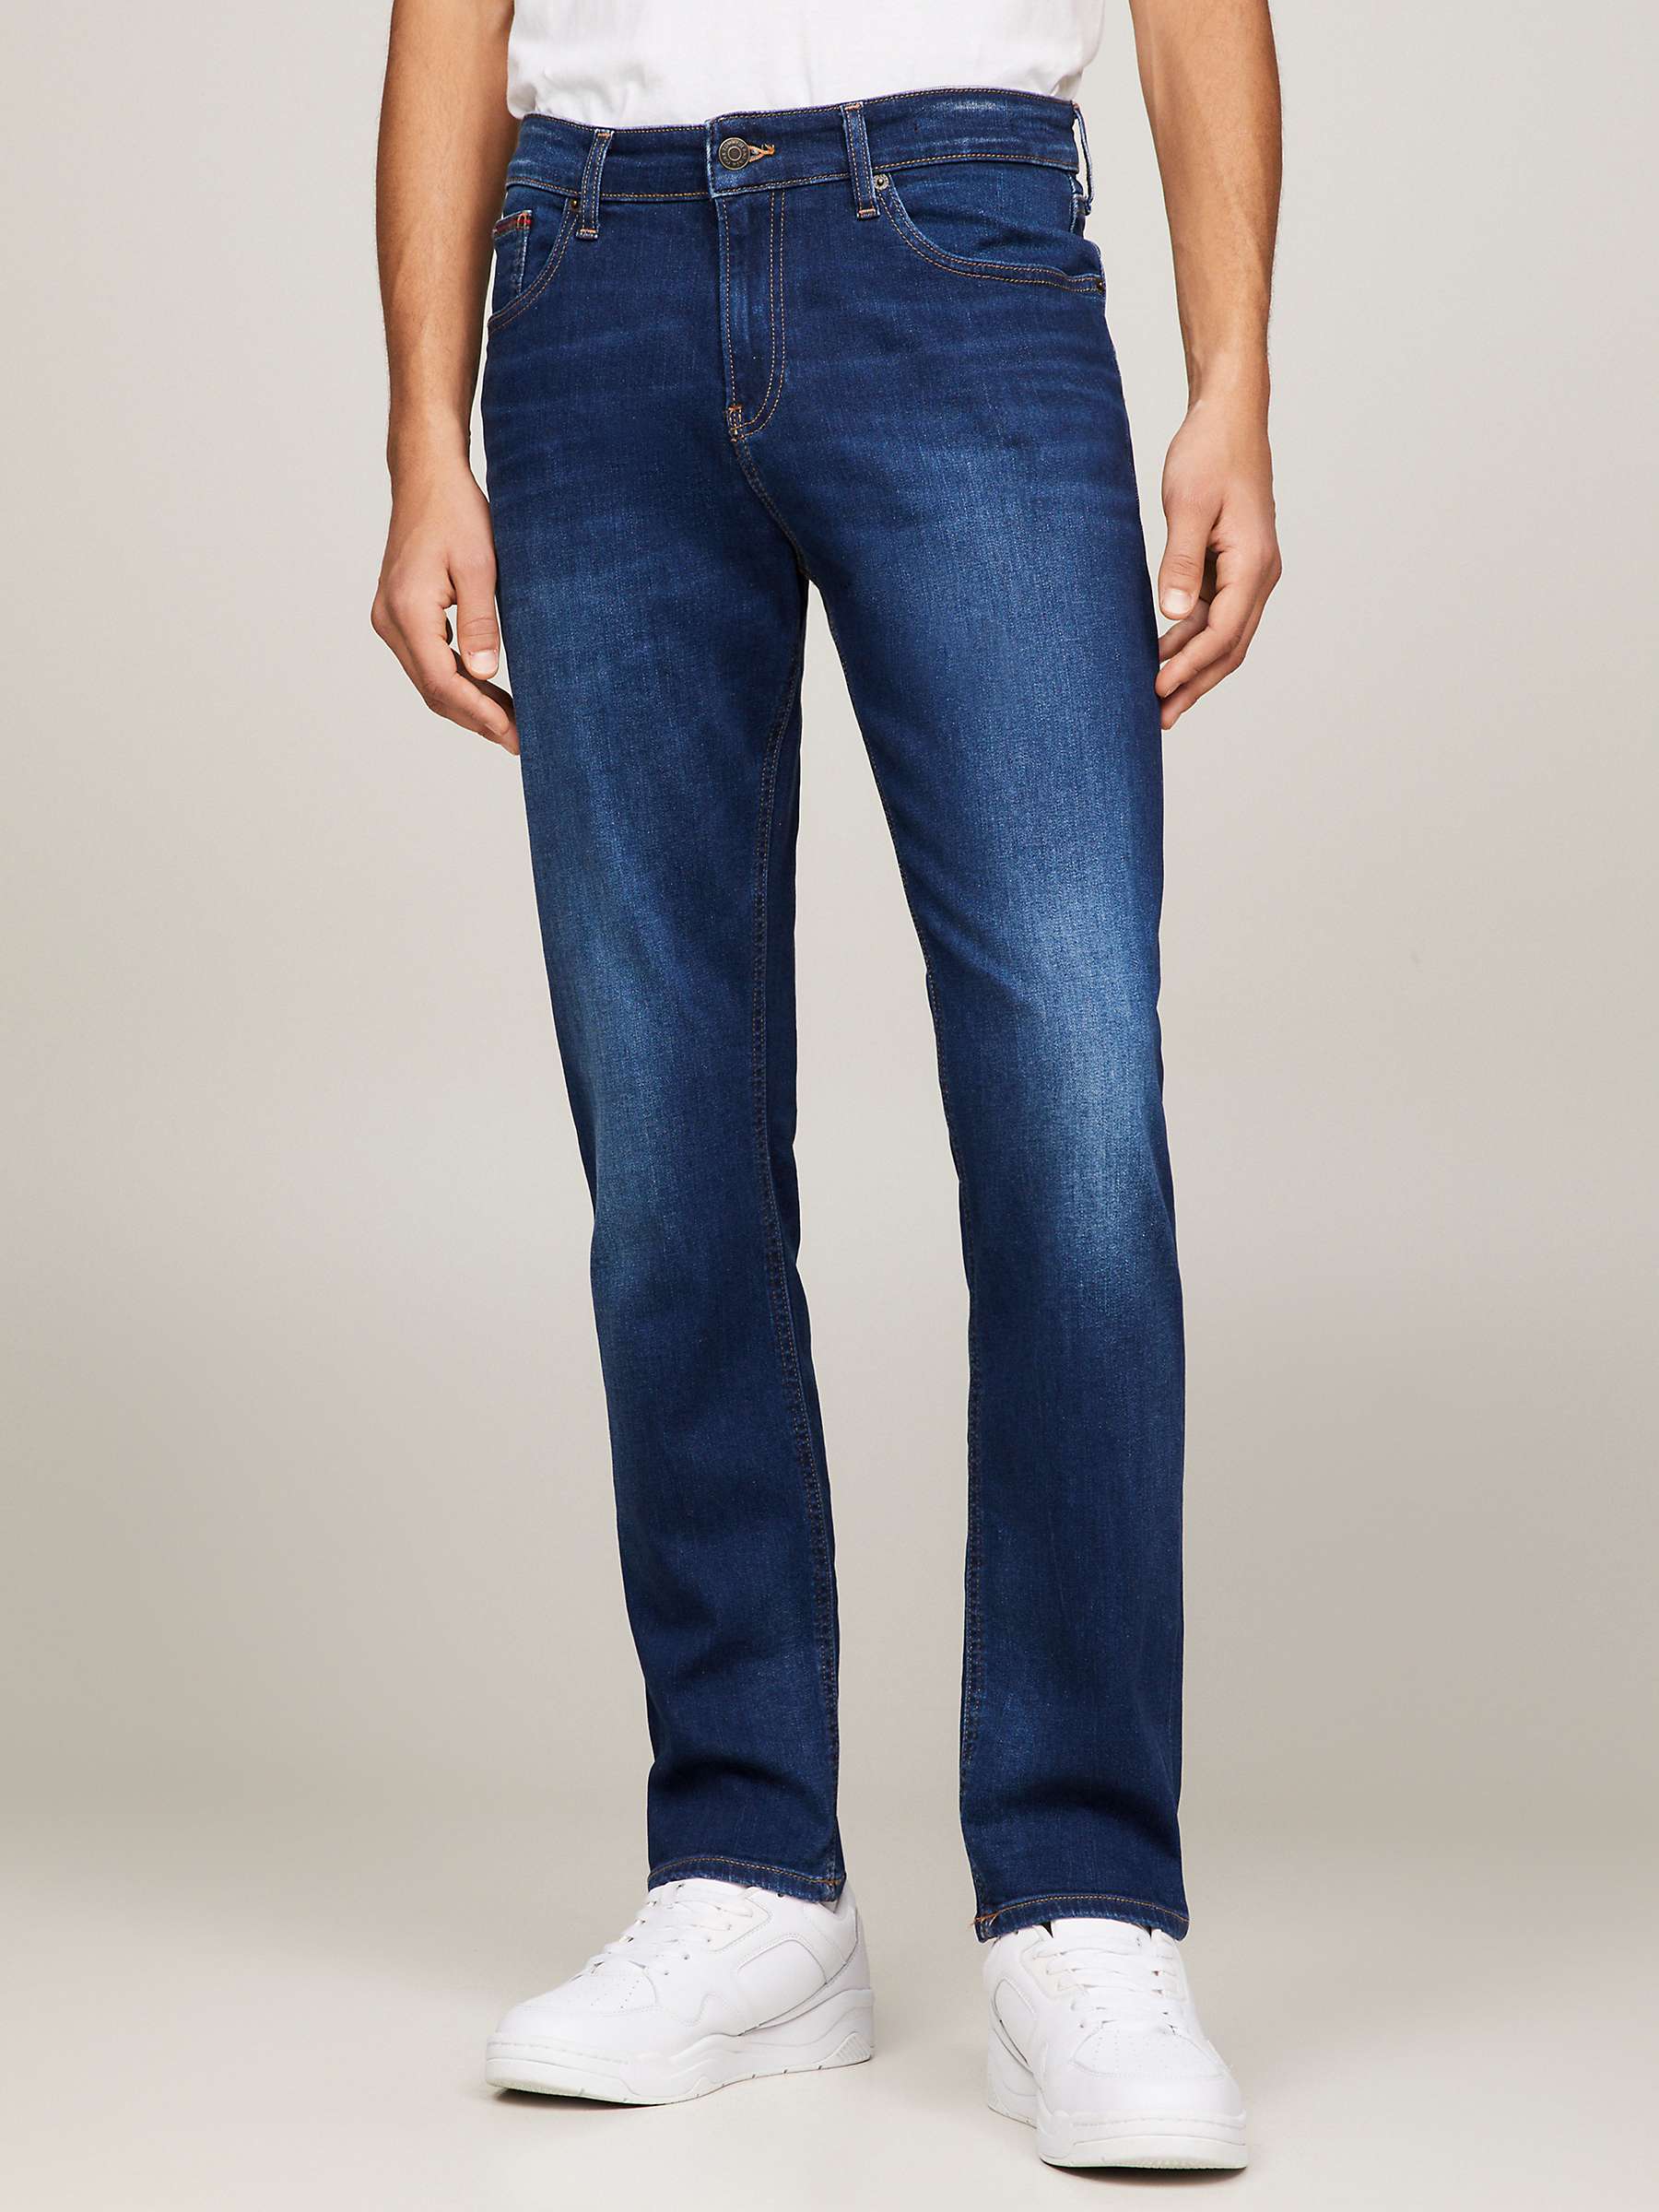 Buy Tommy Jeans Relaxed Straight Jeans, Aspen Dark Blue Stretch Online at johnlewis.com